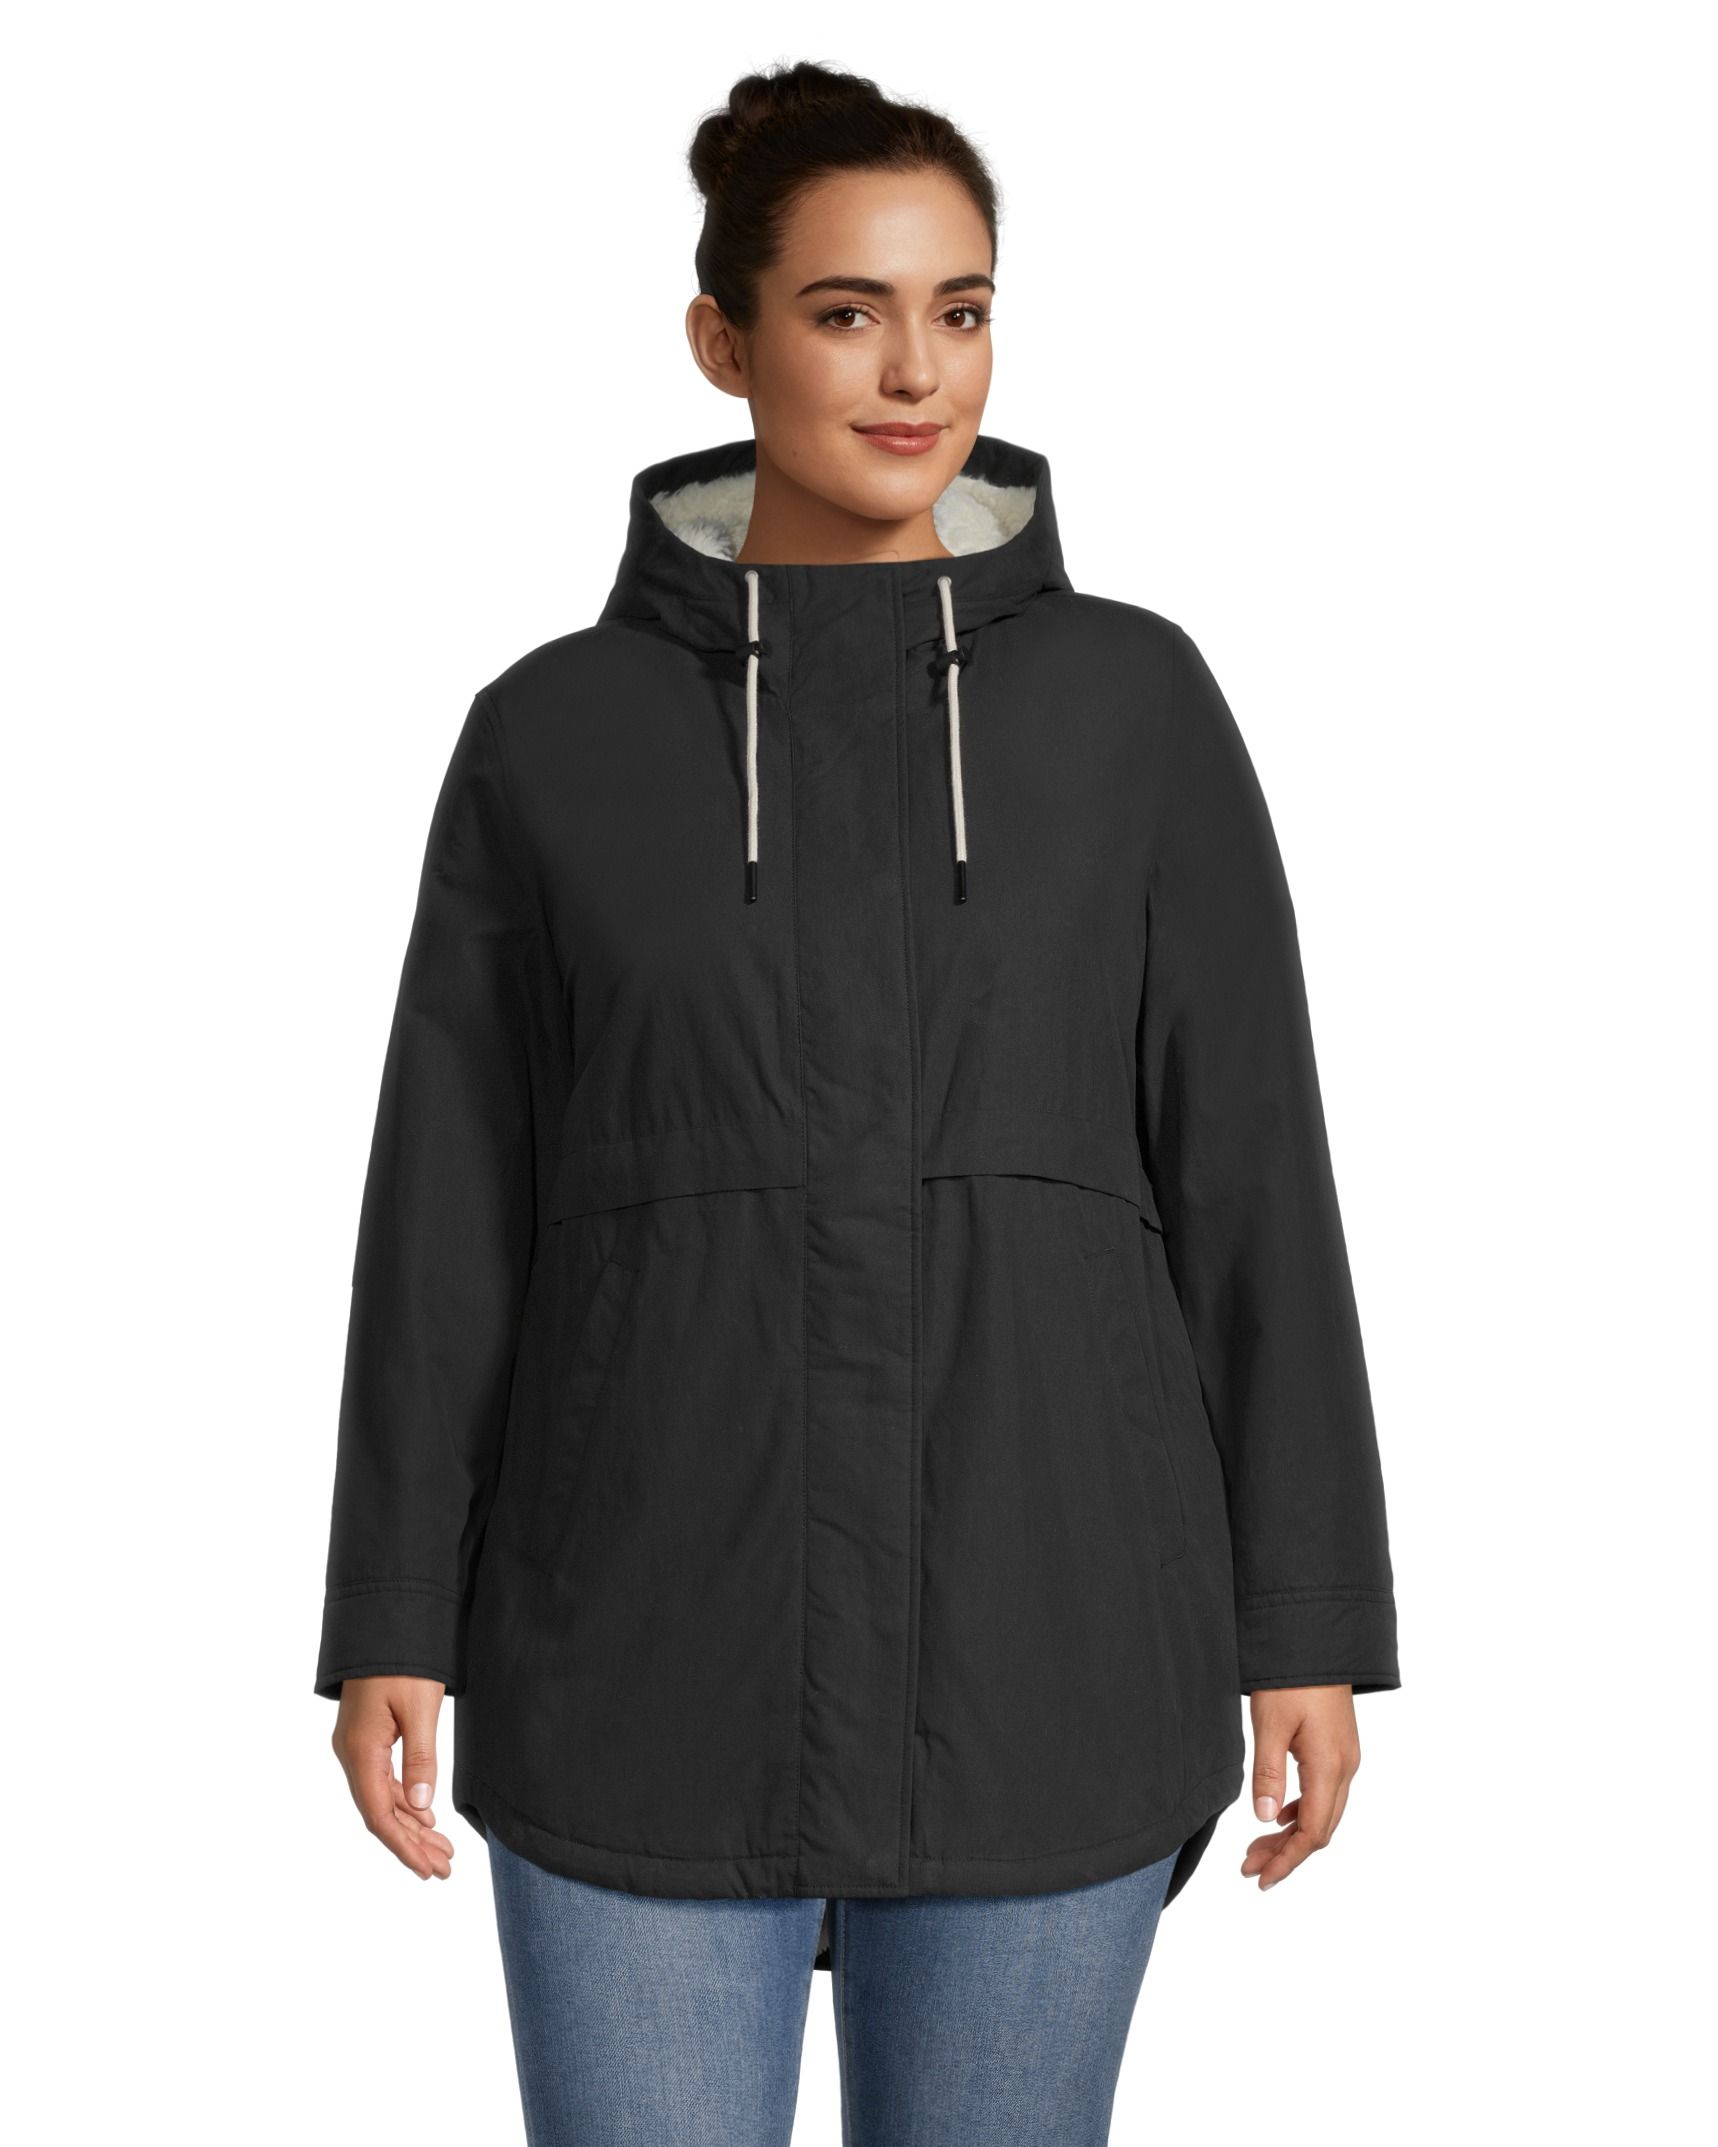 Denver Hayes Women's Sherpa Lined Casual Jacket | Marks